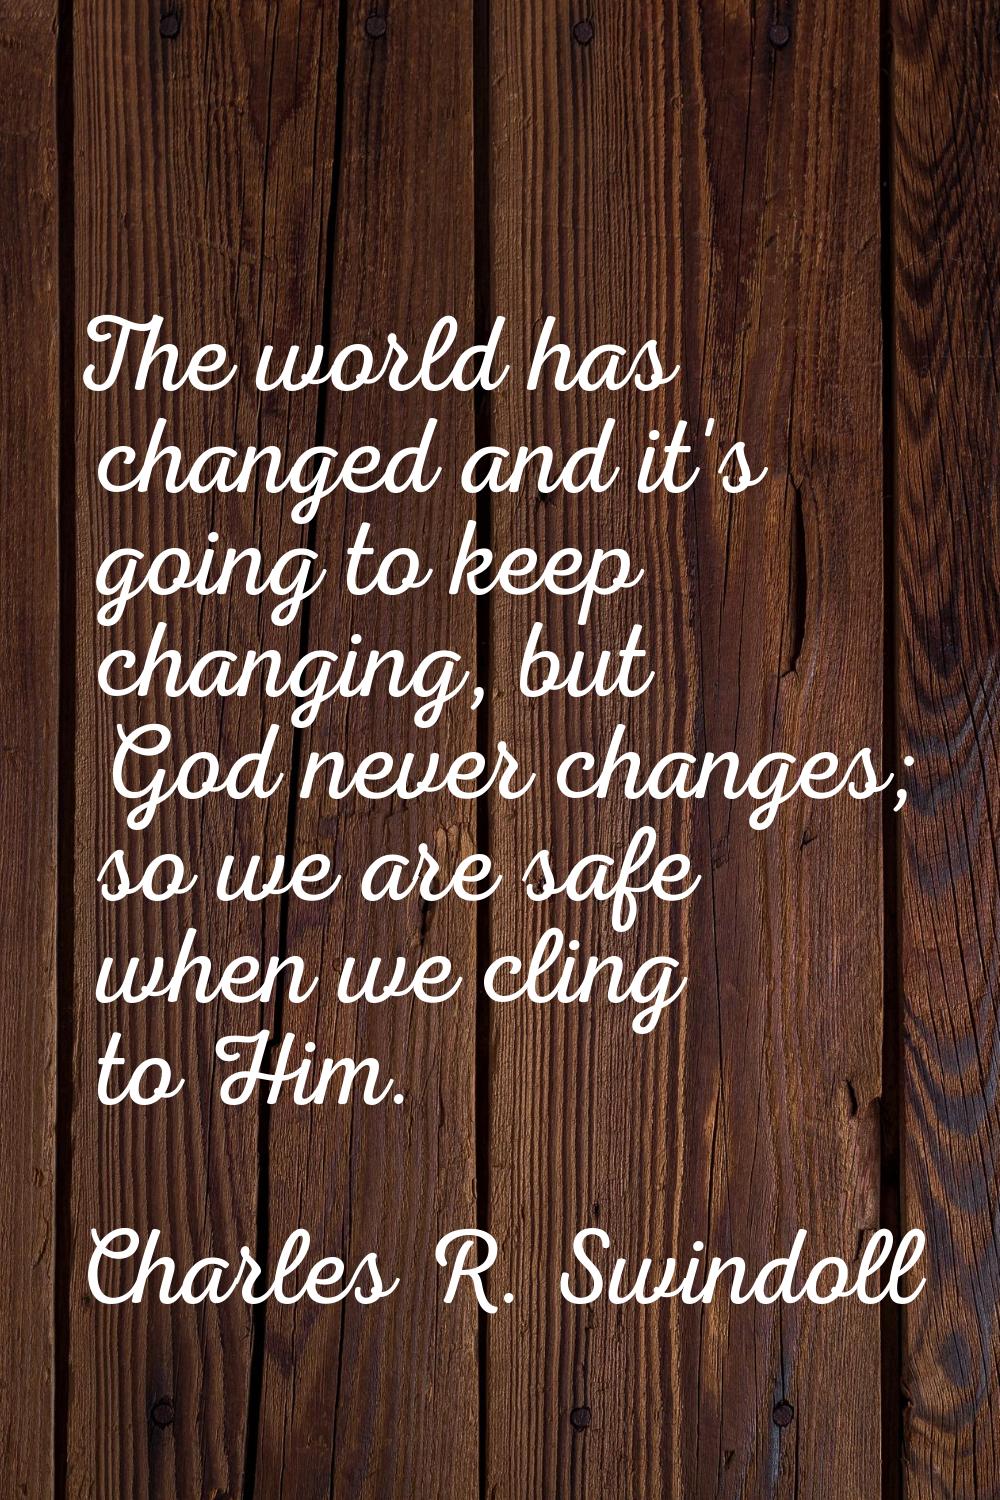 The world has changed and it's going to keep changing, but God never changes; so we are safe when w